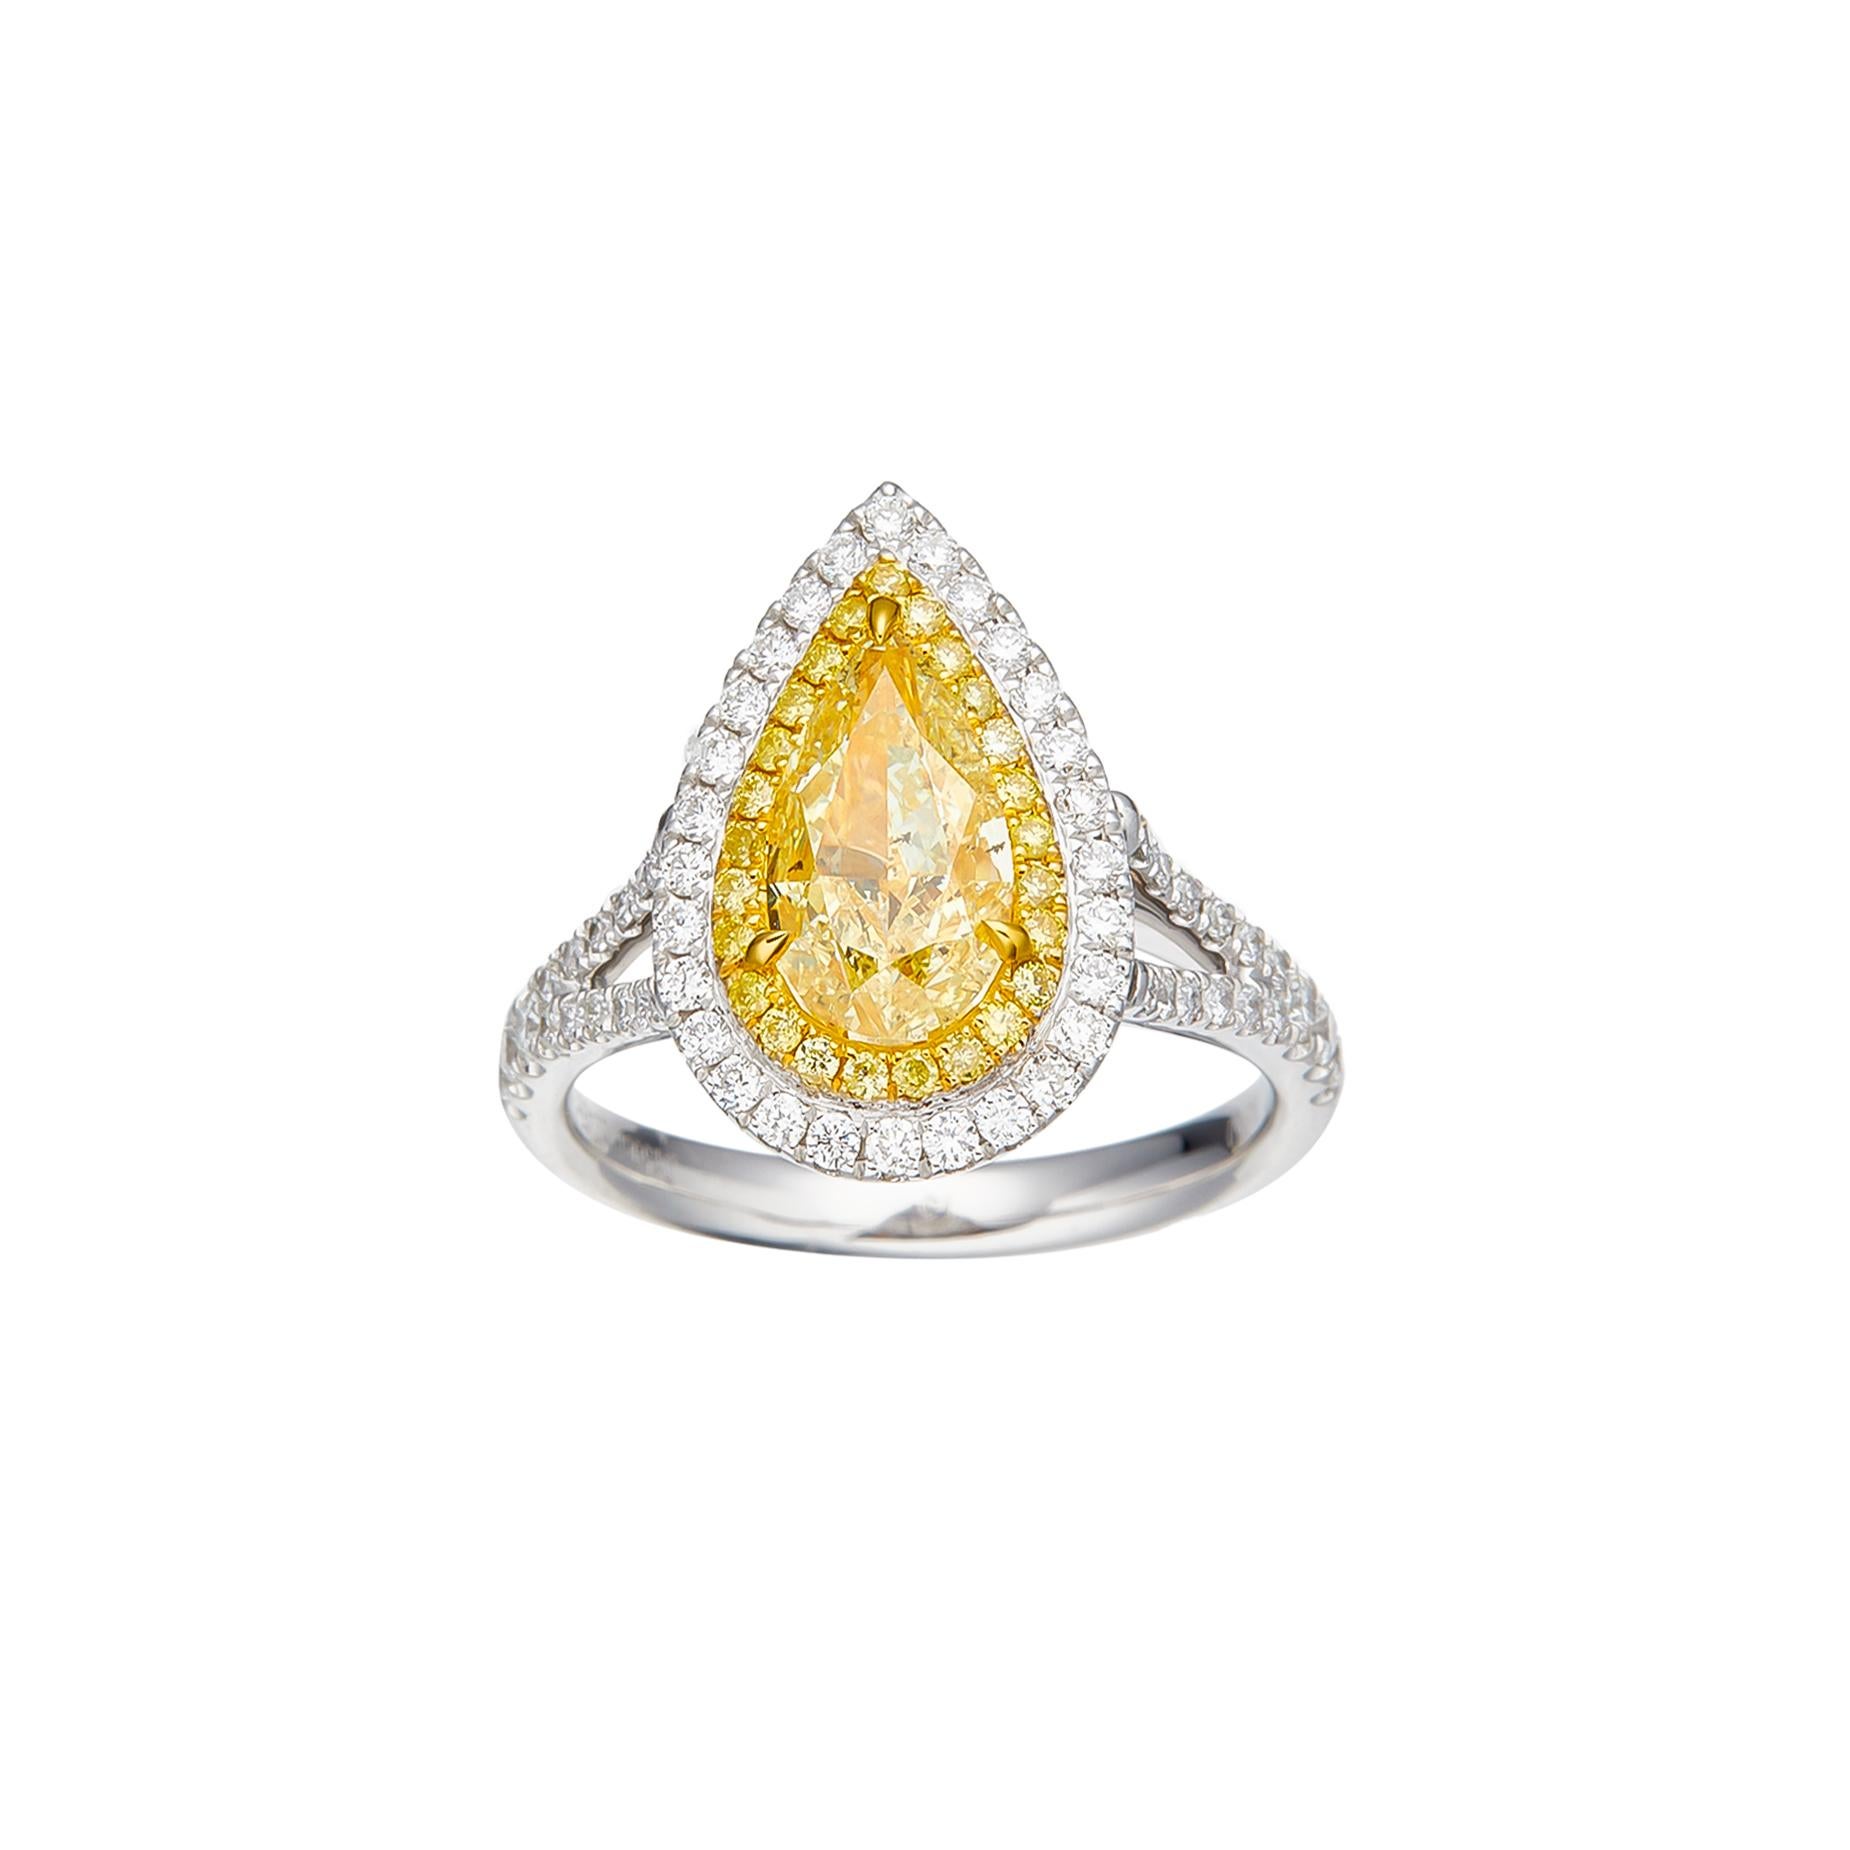 Introducing a true marvel of nature's elegance and versatility – a GIA Certified 1.50 carat W-X Range Natural Pear Shaped Diamond Solitaire Ring, delicately set in luxurious 18kt gold. This exquisite piece is not only a stunning representation of